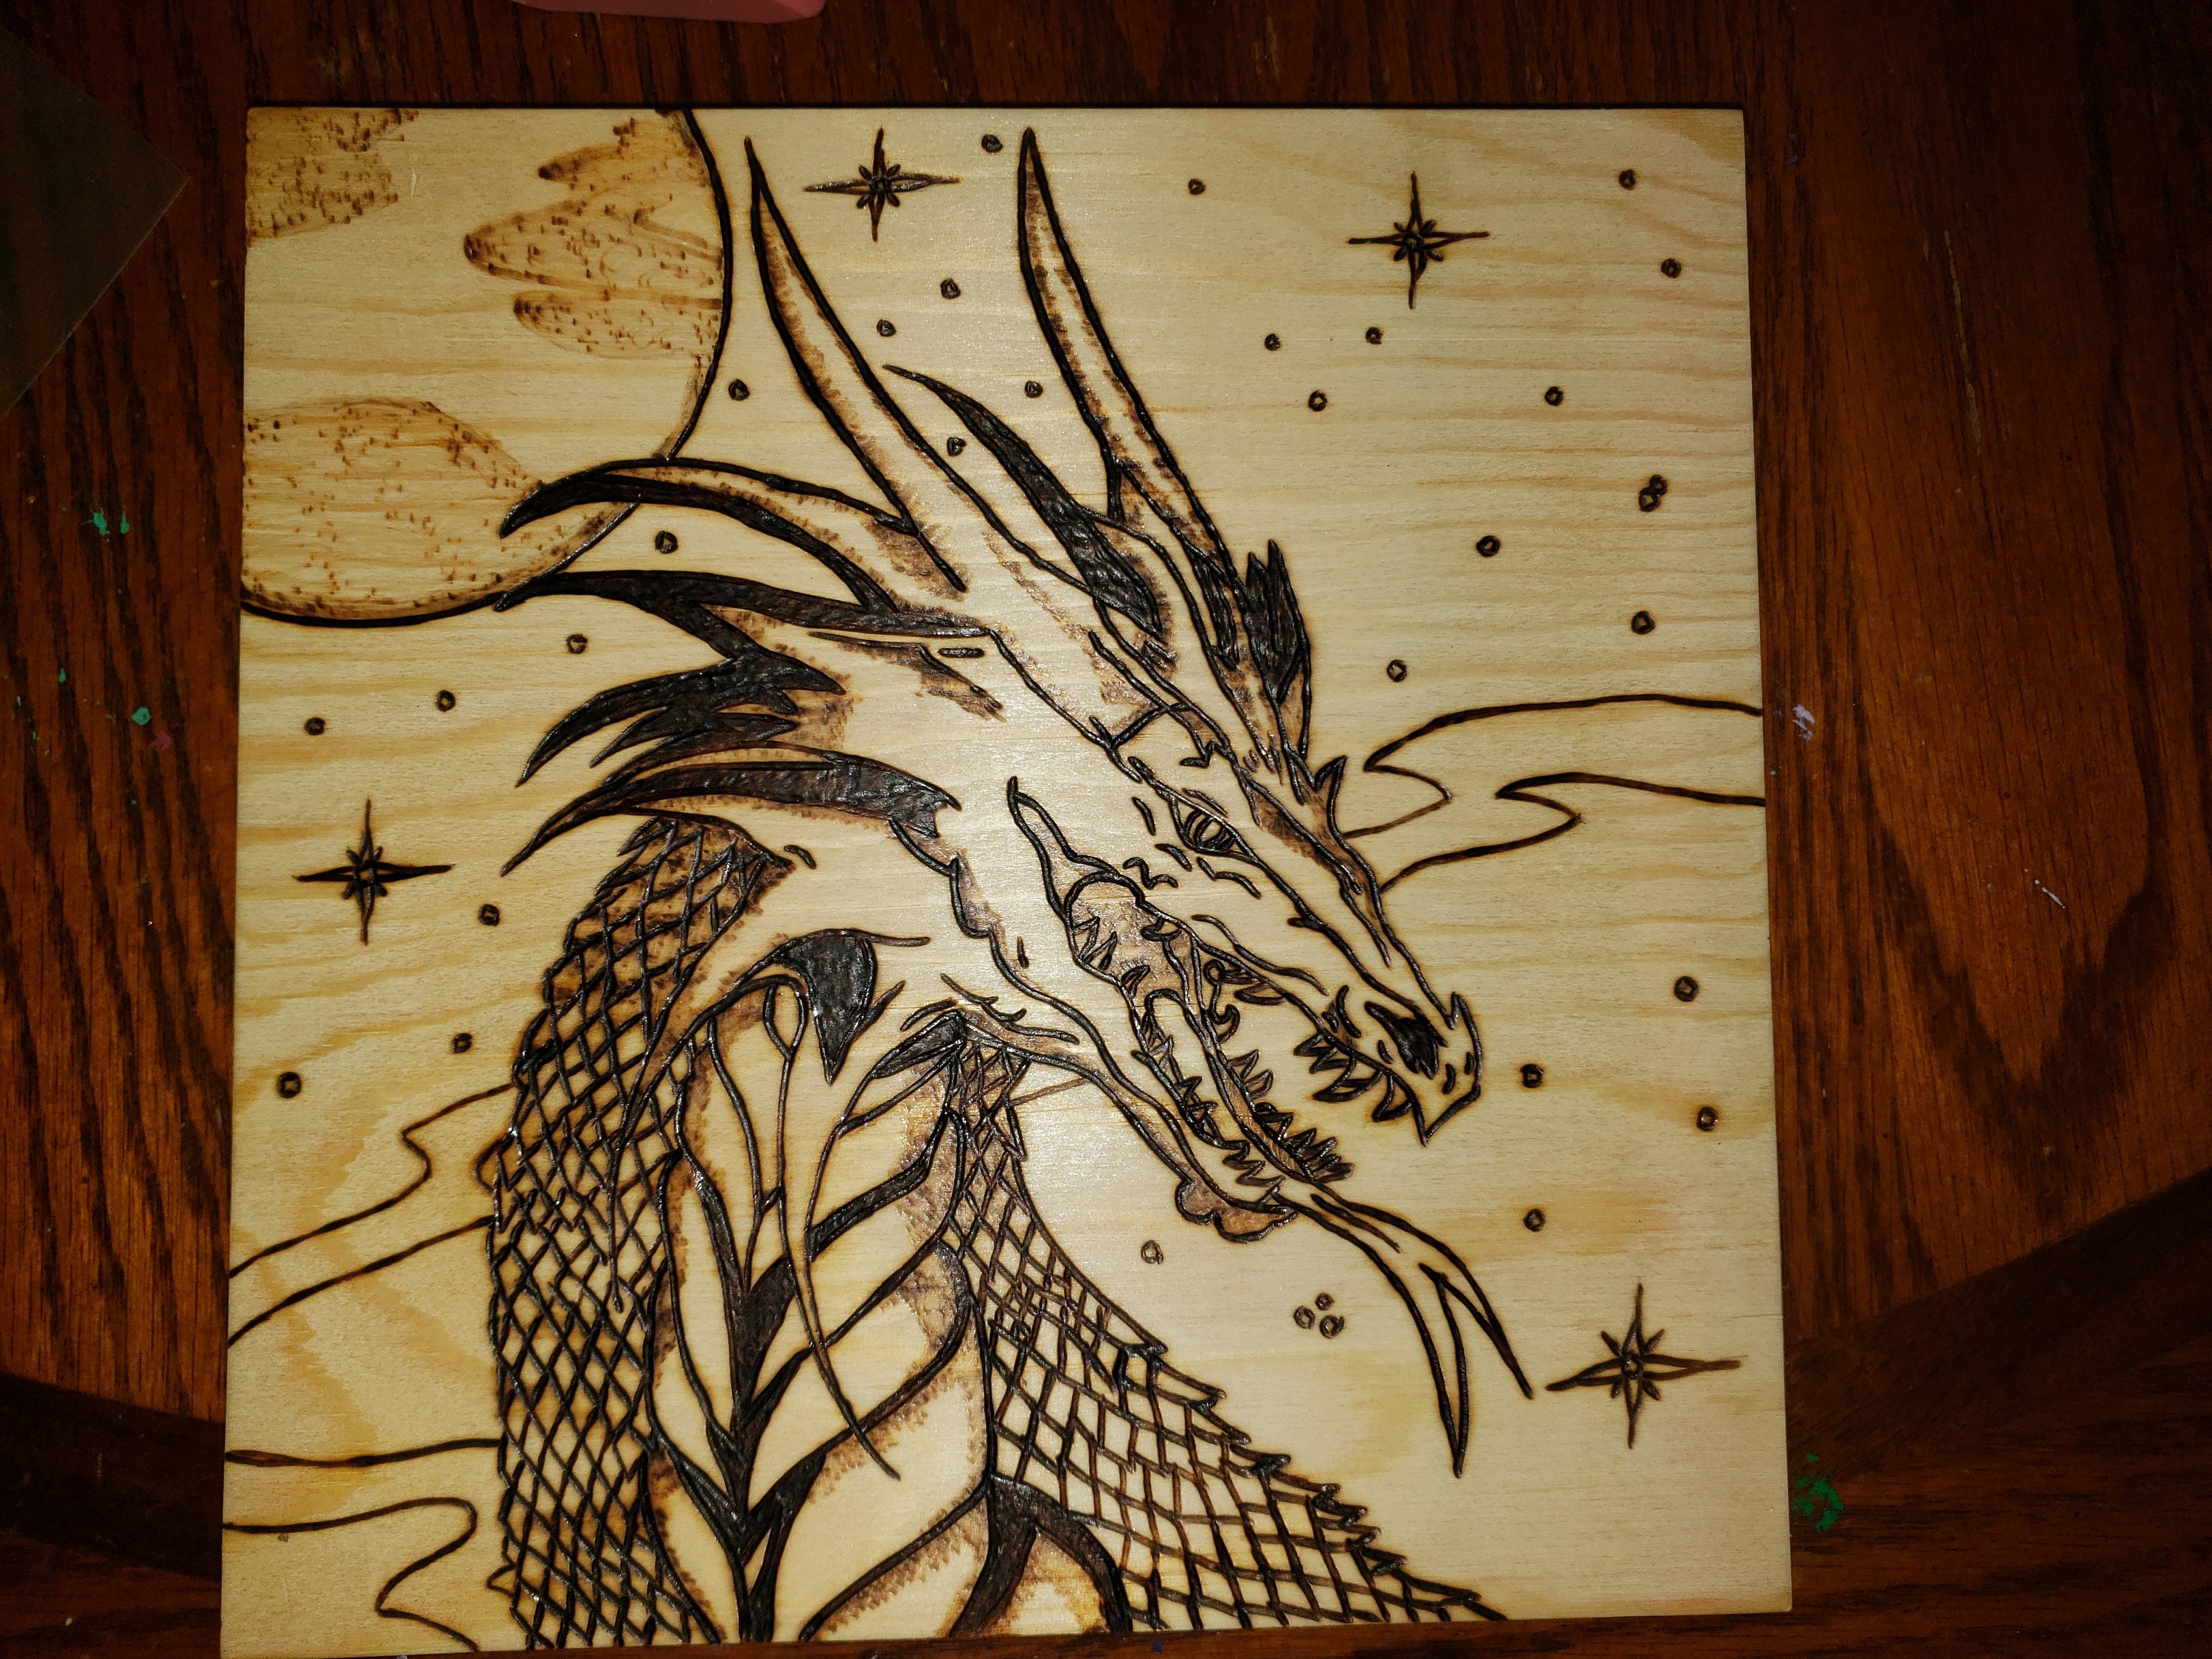 Our Dragon Segus.  Wood burning, Wood pieces, Wood